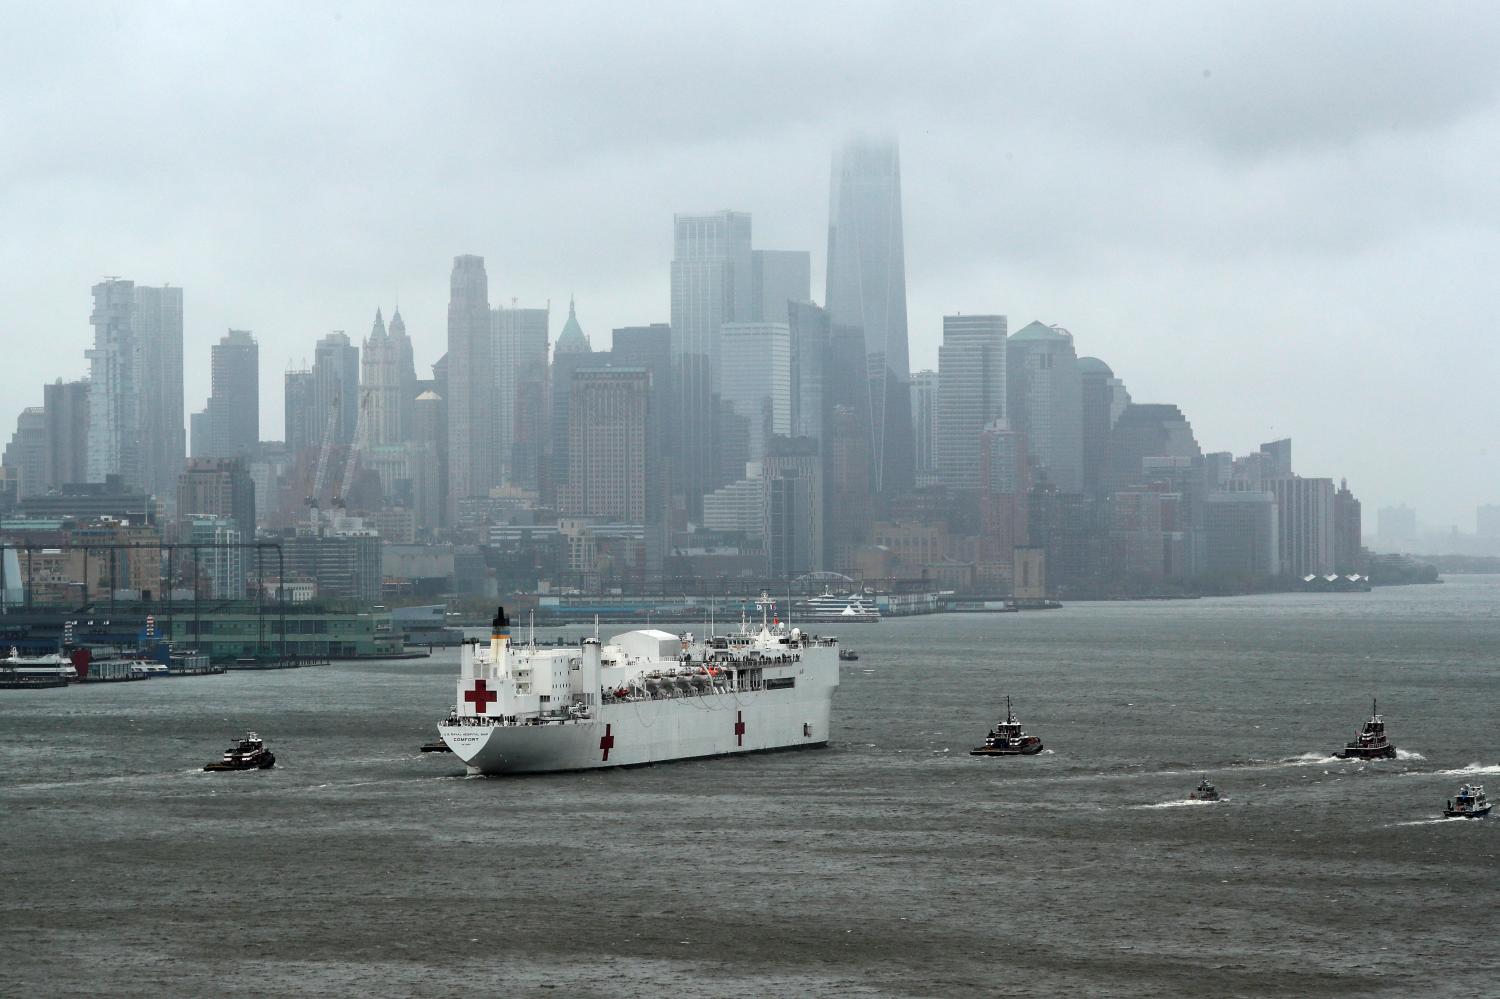 The U.S. Navy hospital ship USNS Comfort heads past lower Manhattan and the World Trade Center building under heavy fog as it leaves to return to its home port of Norfolk, Virginia, after treating patients during the outbreak of coronavirus disease (COVID-19) in New York City New York, U.S., April 30, 2020. REUTERS/Mike Segar